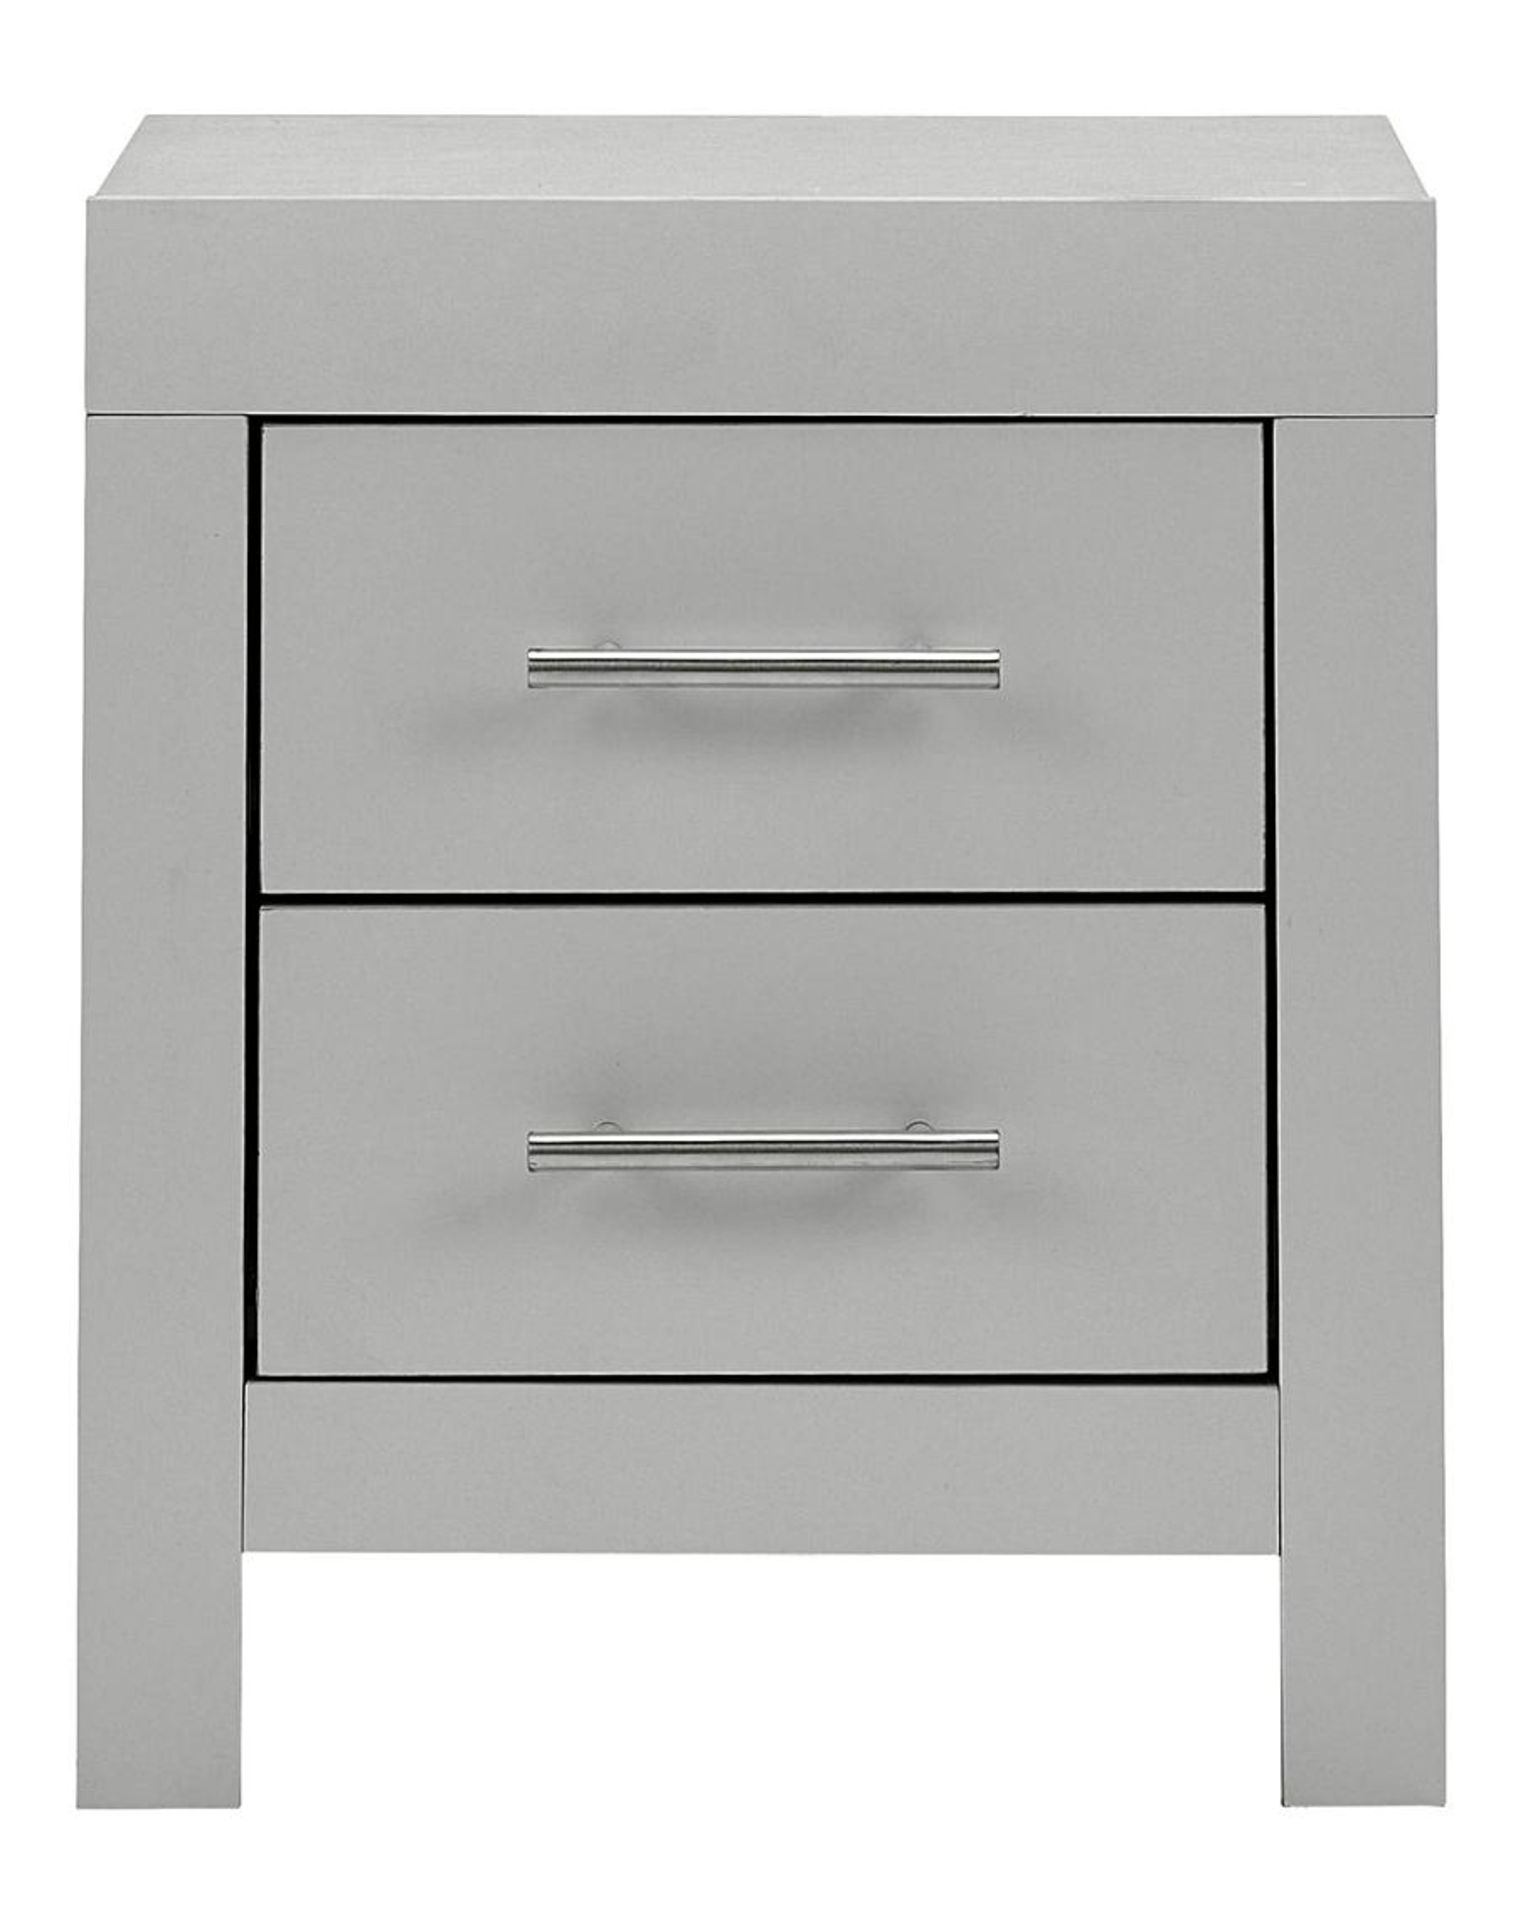 Dakota 2 Drawer Bedside Cabinet. RRP £109.00. The Bedside Table consists of two drawers to keep